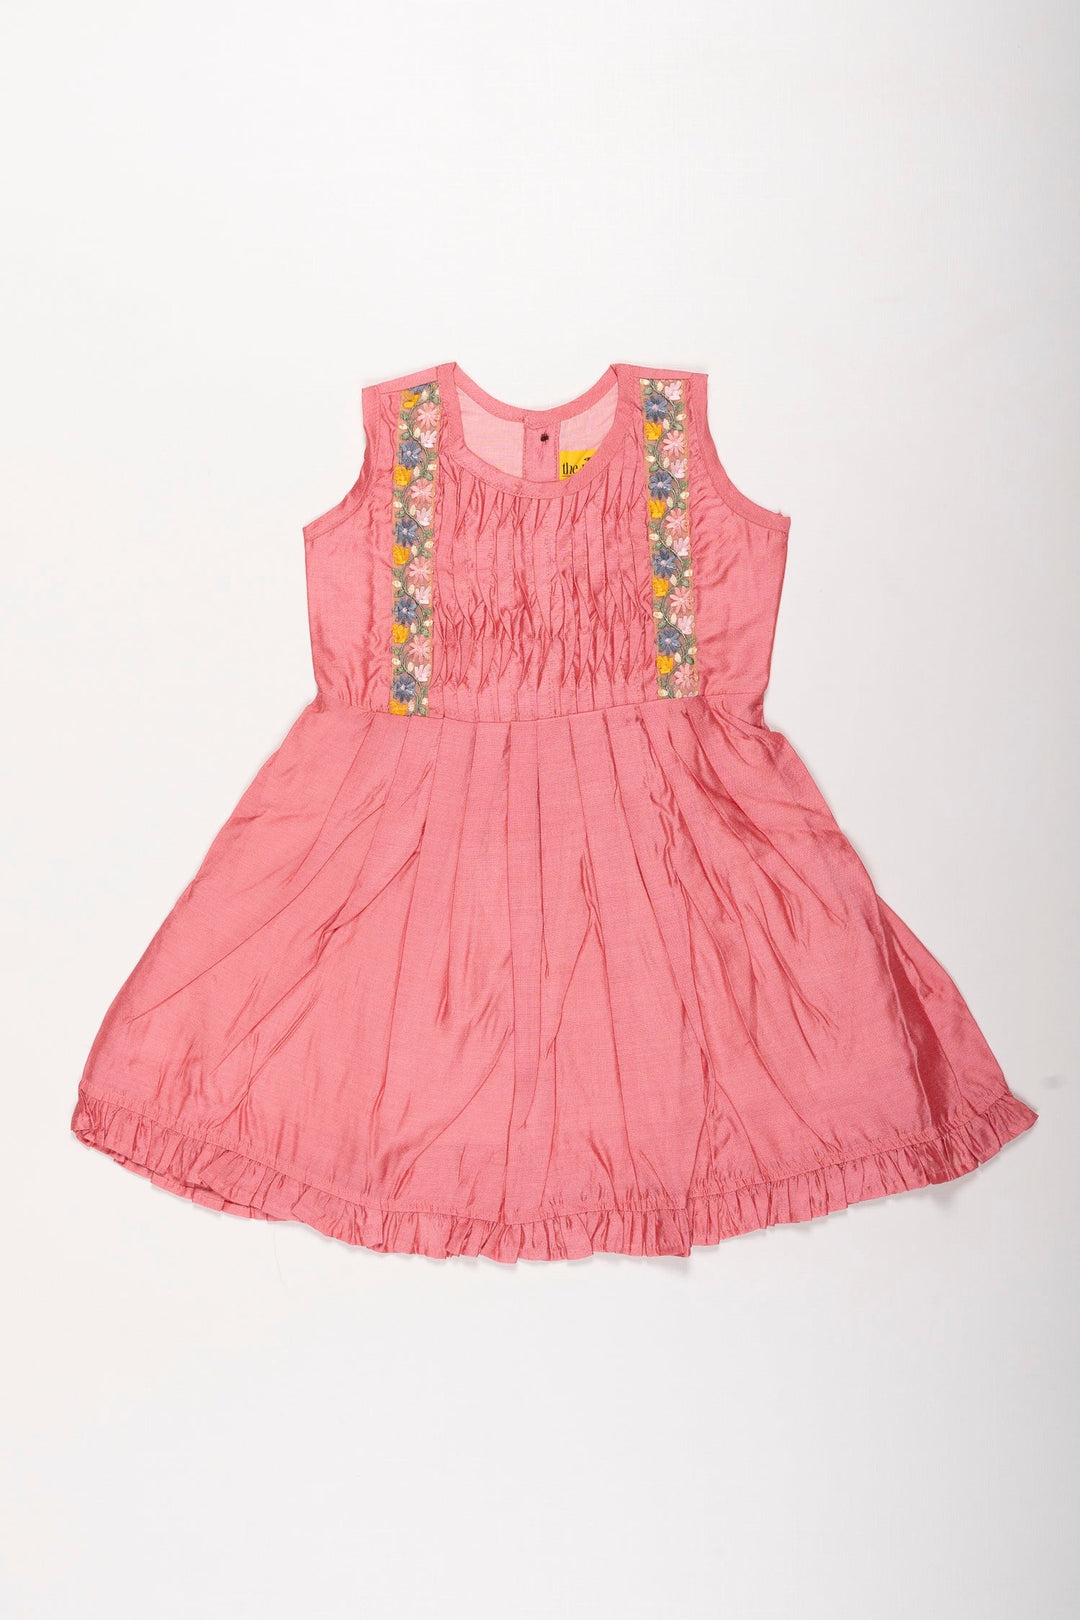 The Nesavu Girls Cotton Frock Girls Pleated Summer Cotton Frock with Lace Detailing - Casual Chic Nesavu 16 (1Y) / Pink / Cotton GFC1261A-16 Chic Lace-Detailed Cotton Frock for Girls | Must-Have Summer Collection | The Nesavu